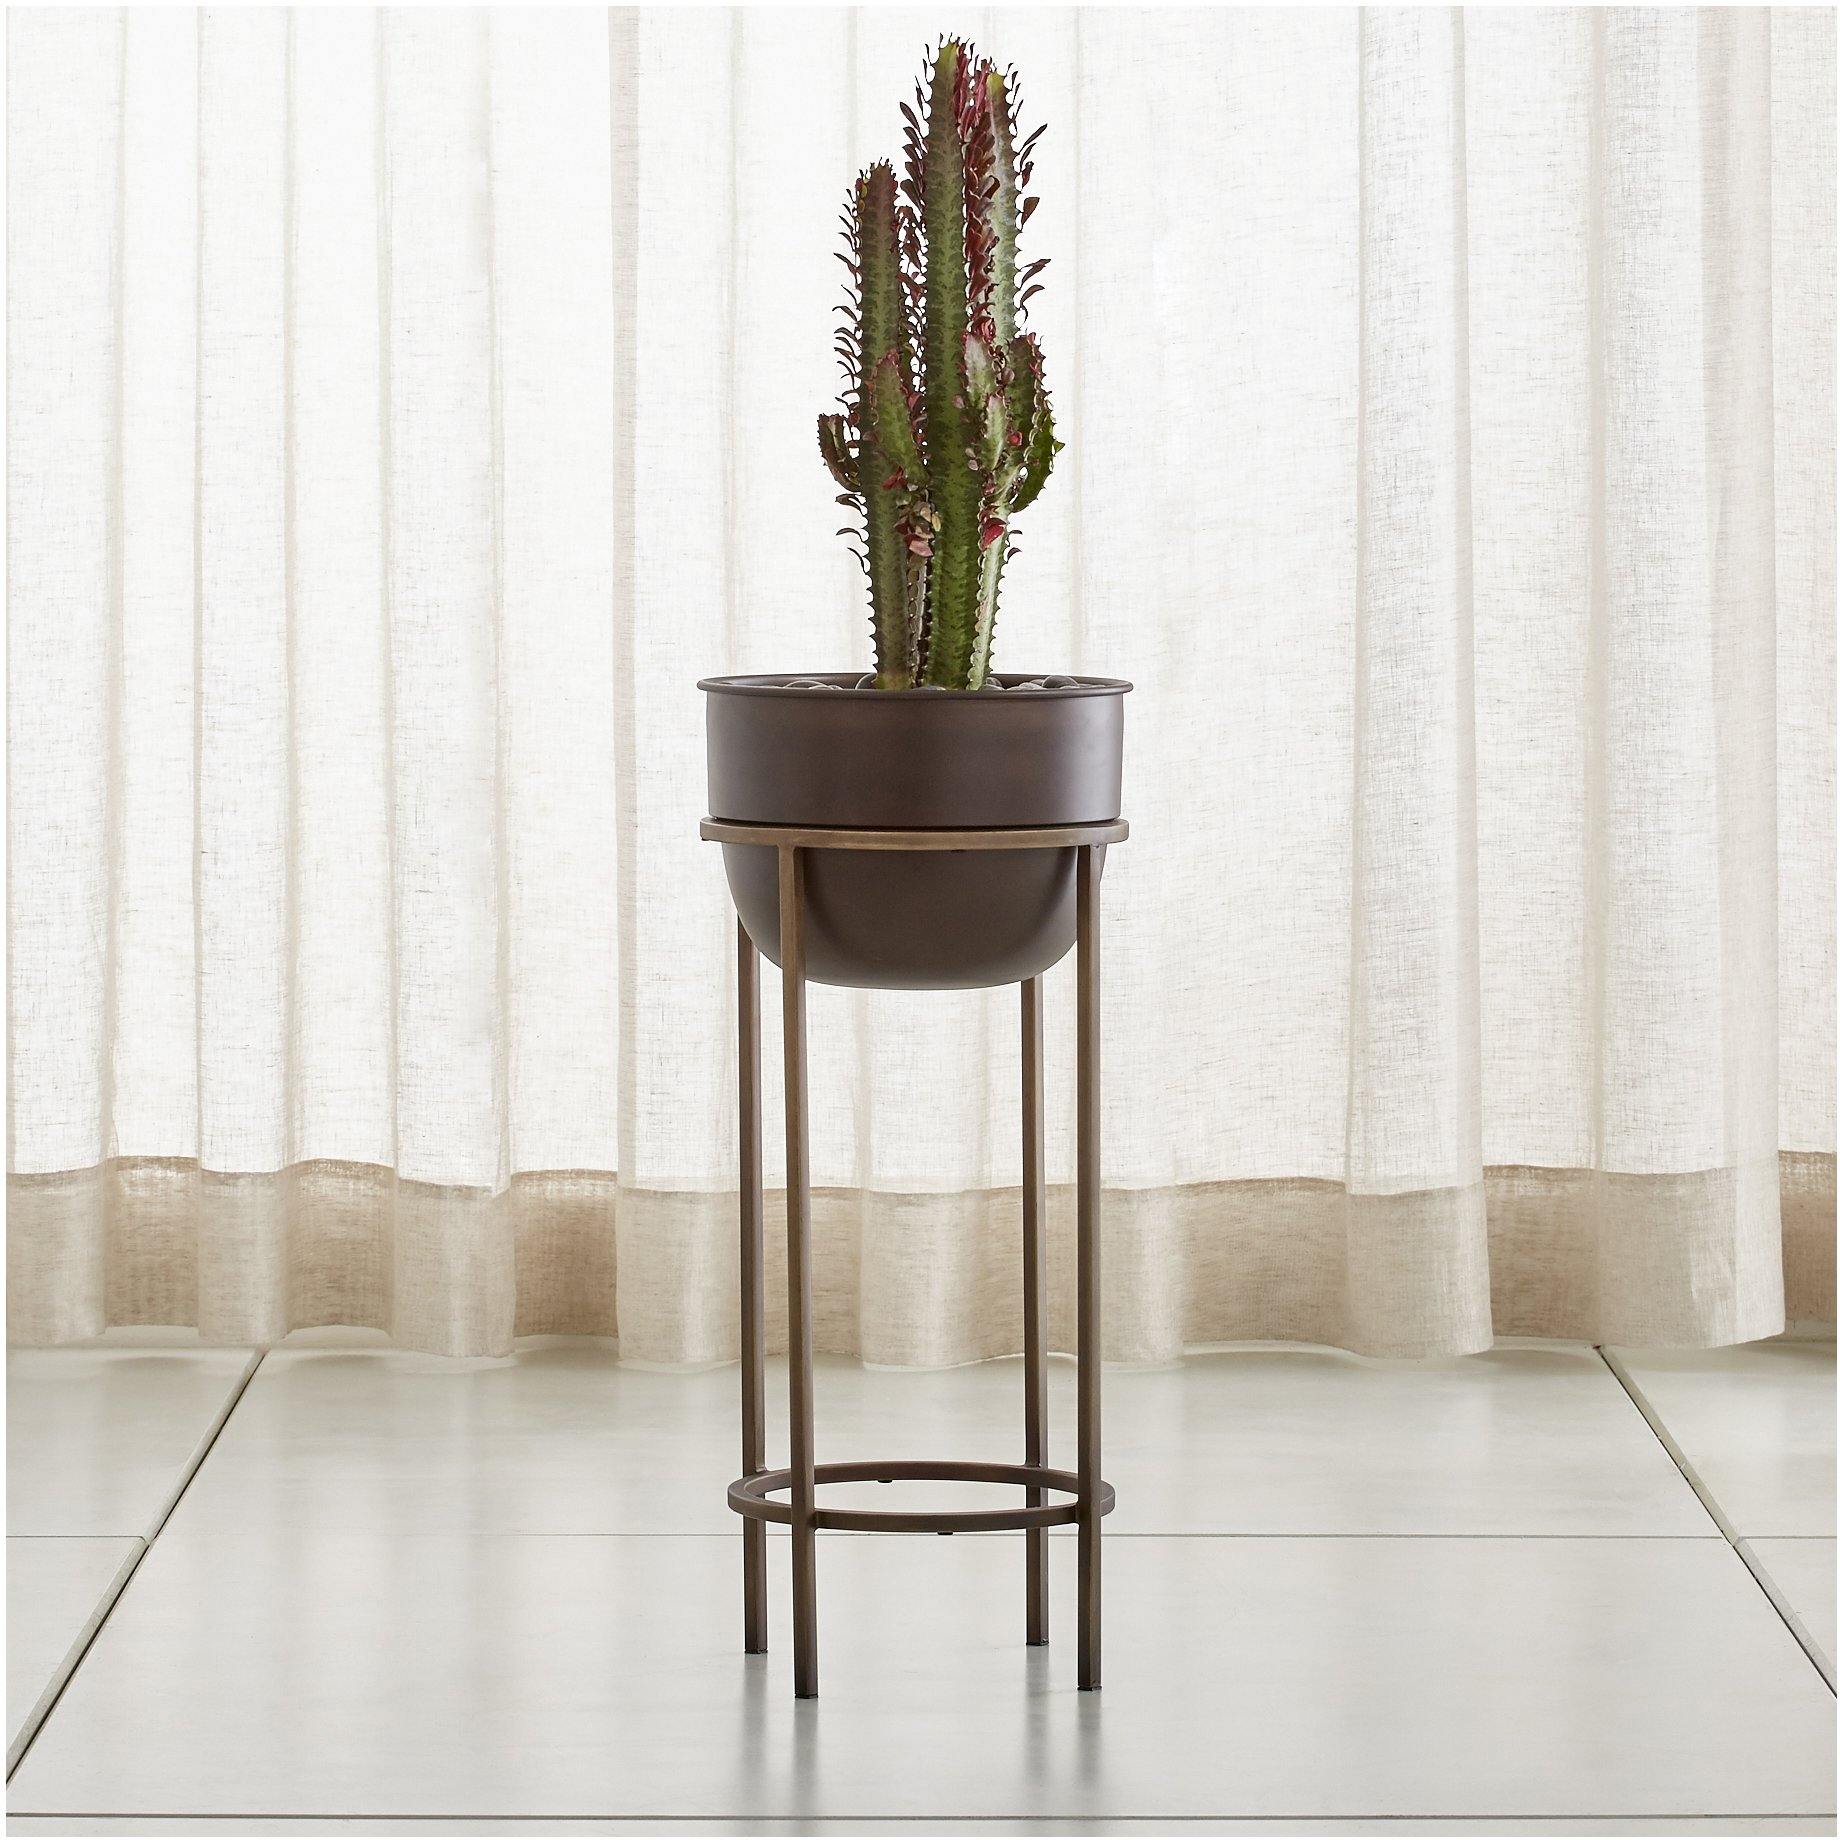 Wesley Medium Metal Planter With Stand